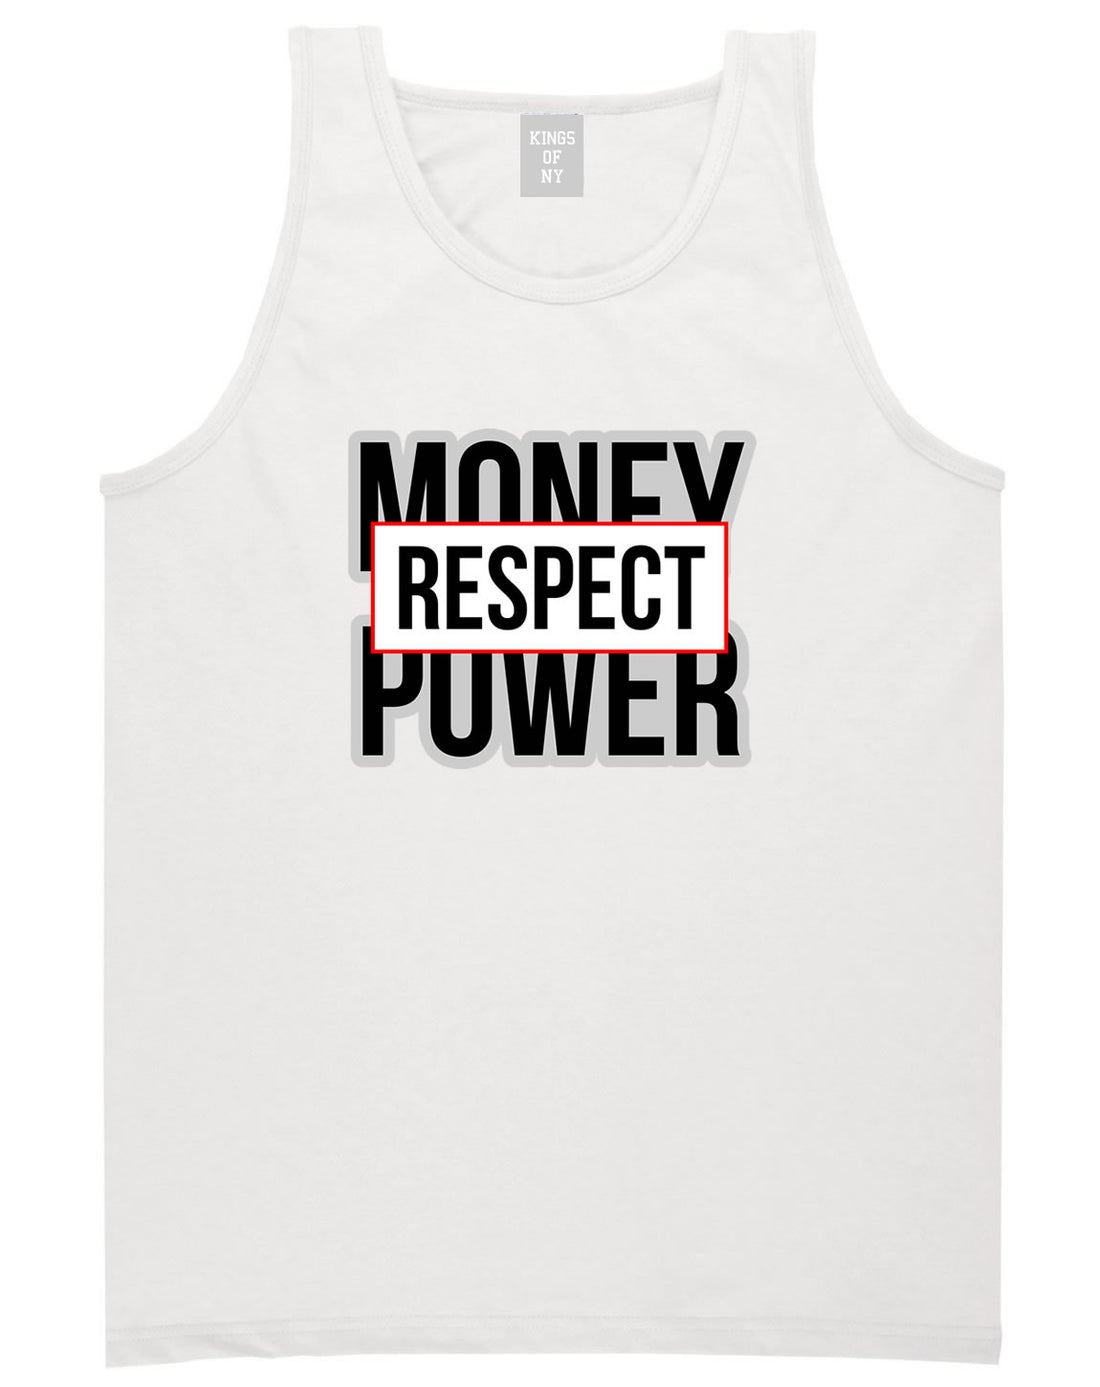 Money Power Respect Tank Top in White By Kings Of NY